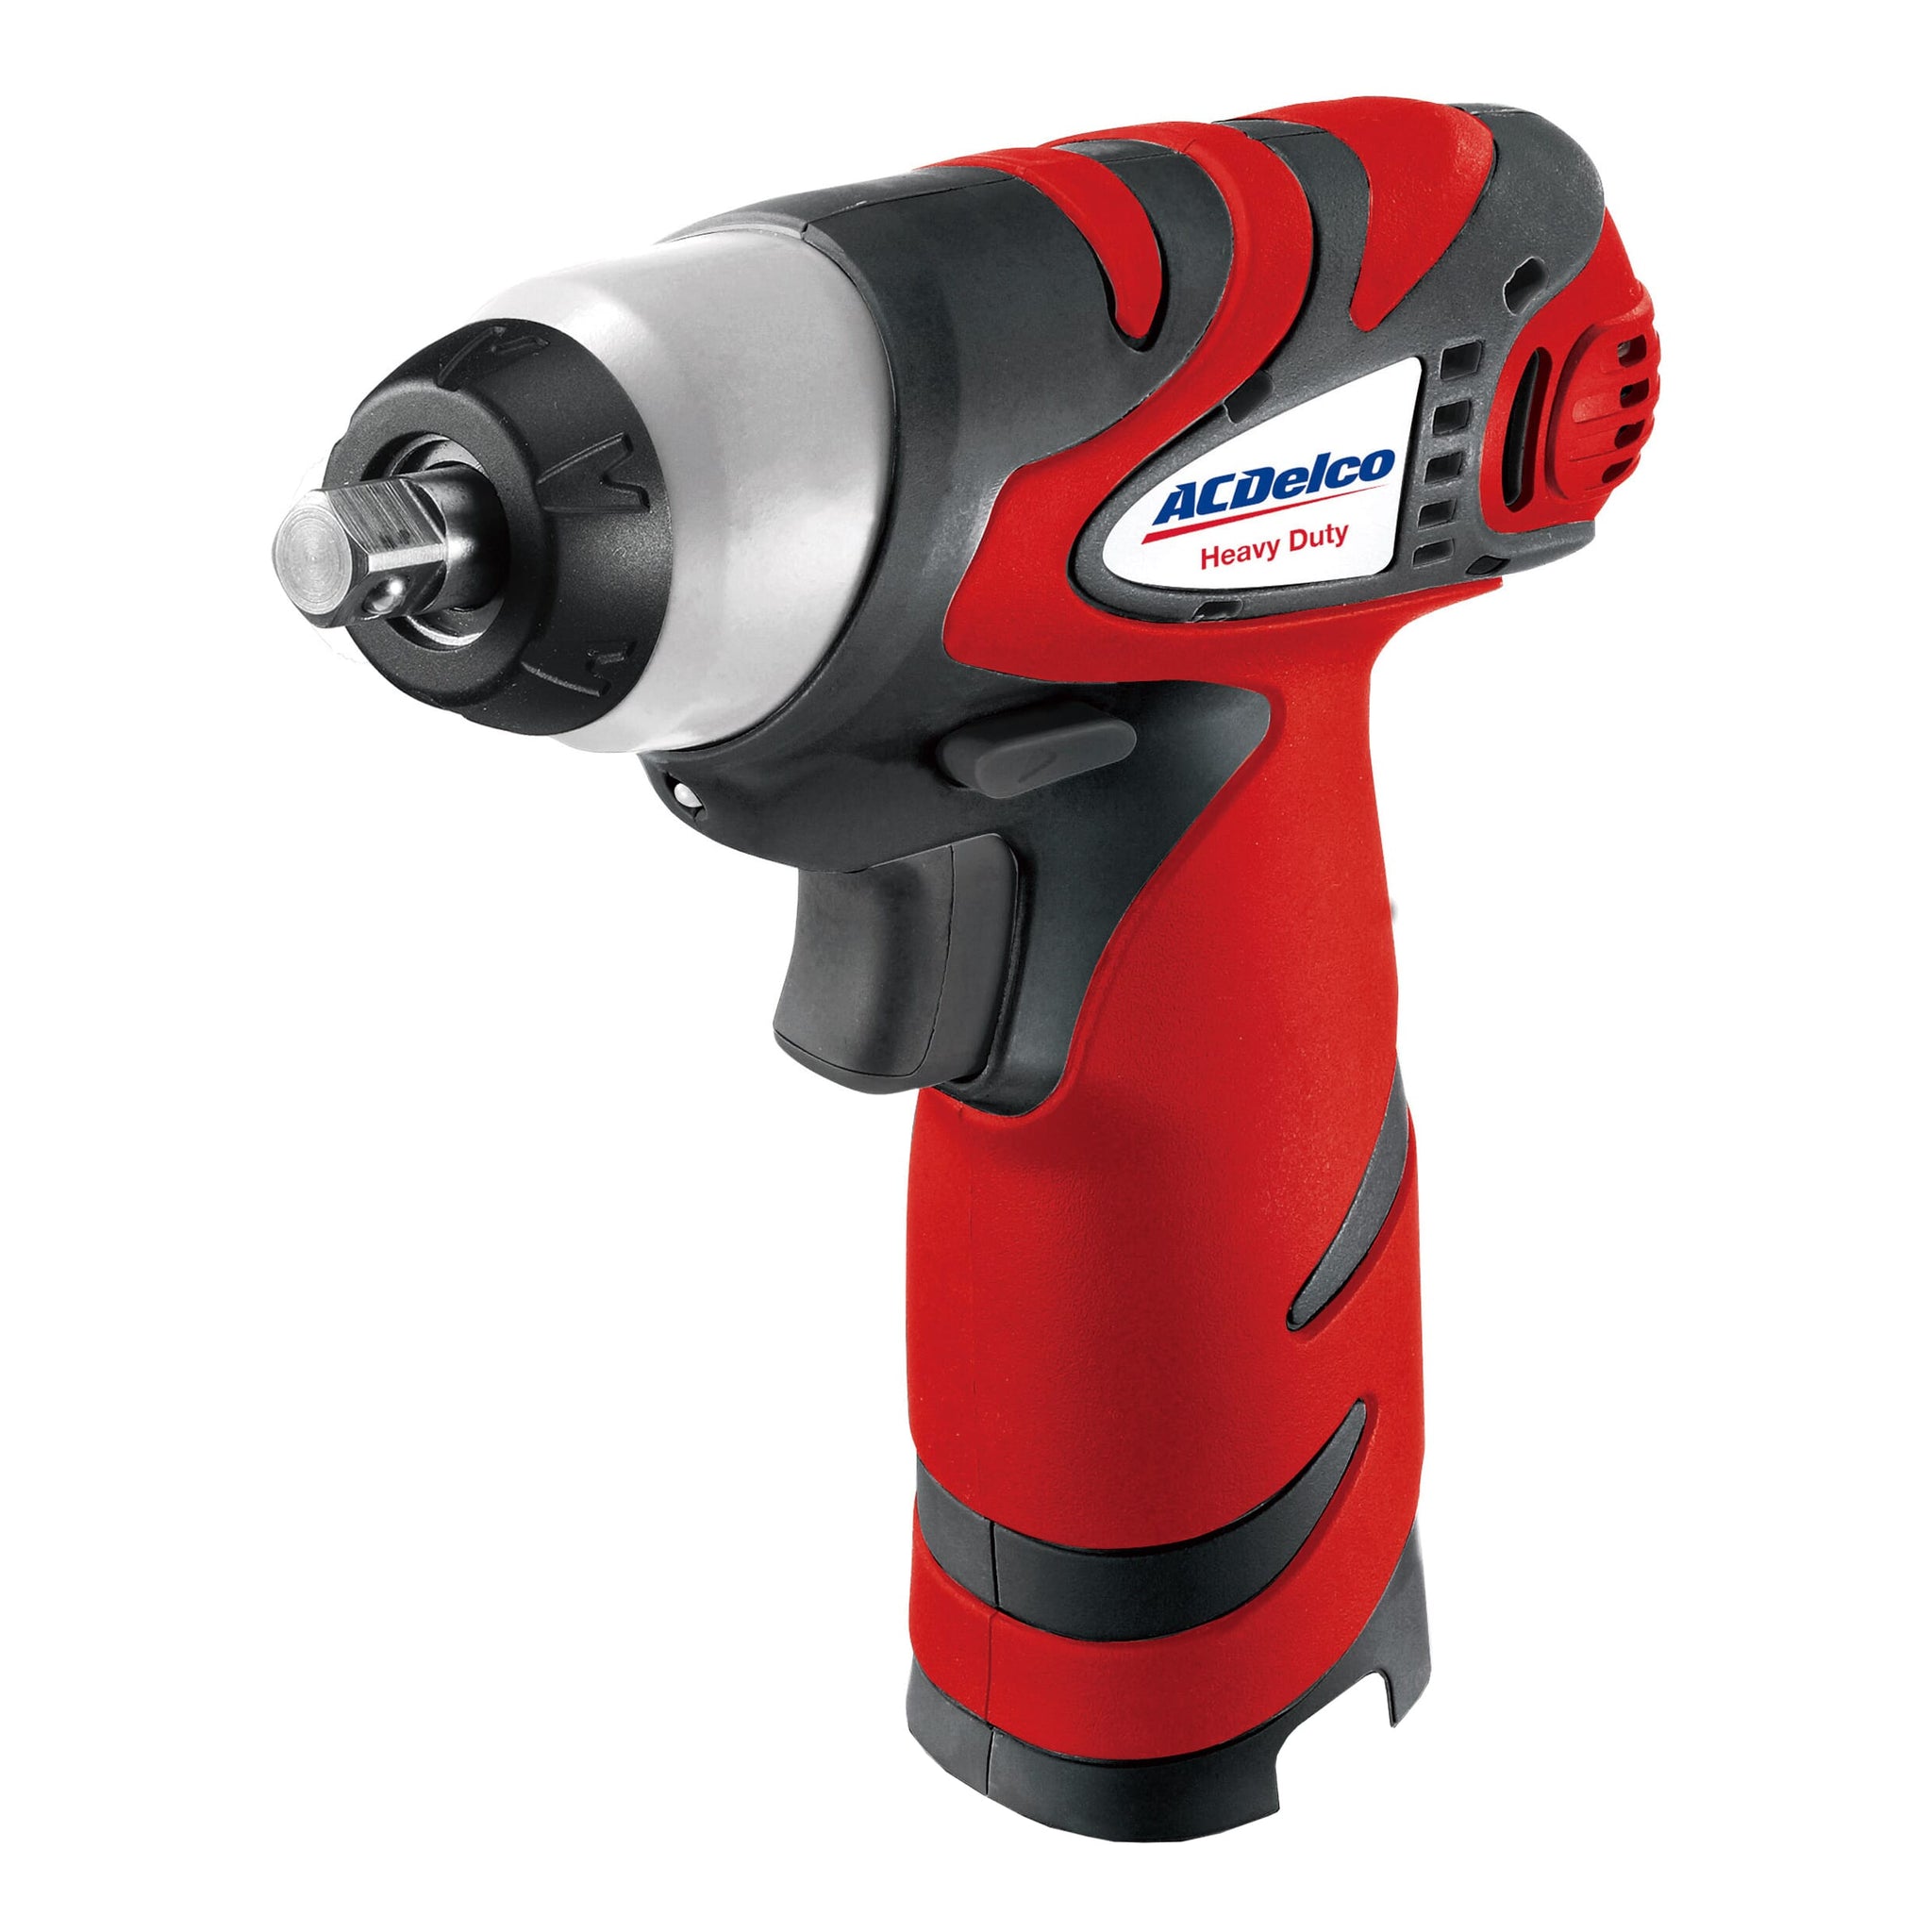 ARI810H Lithium-Ion 8V 3/8" Impact Wrench Power Tool - Tool Only